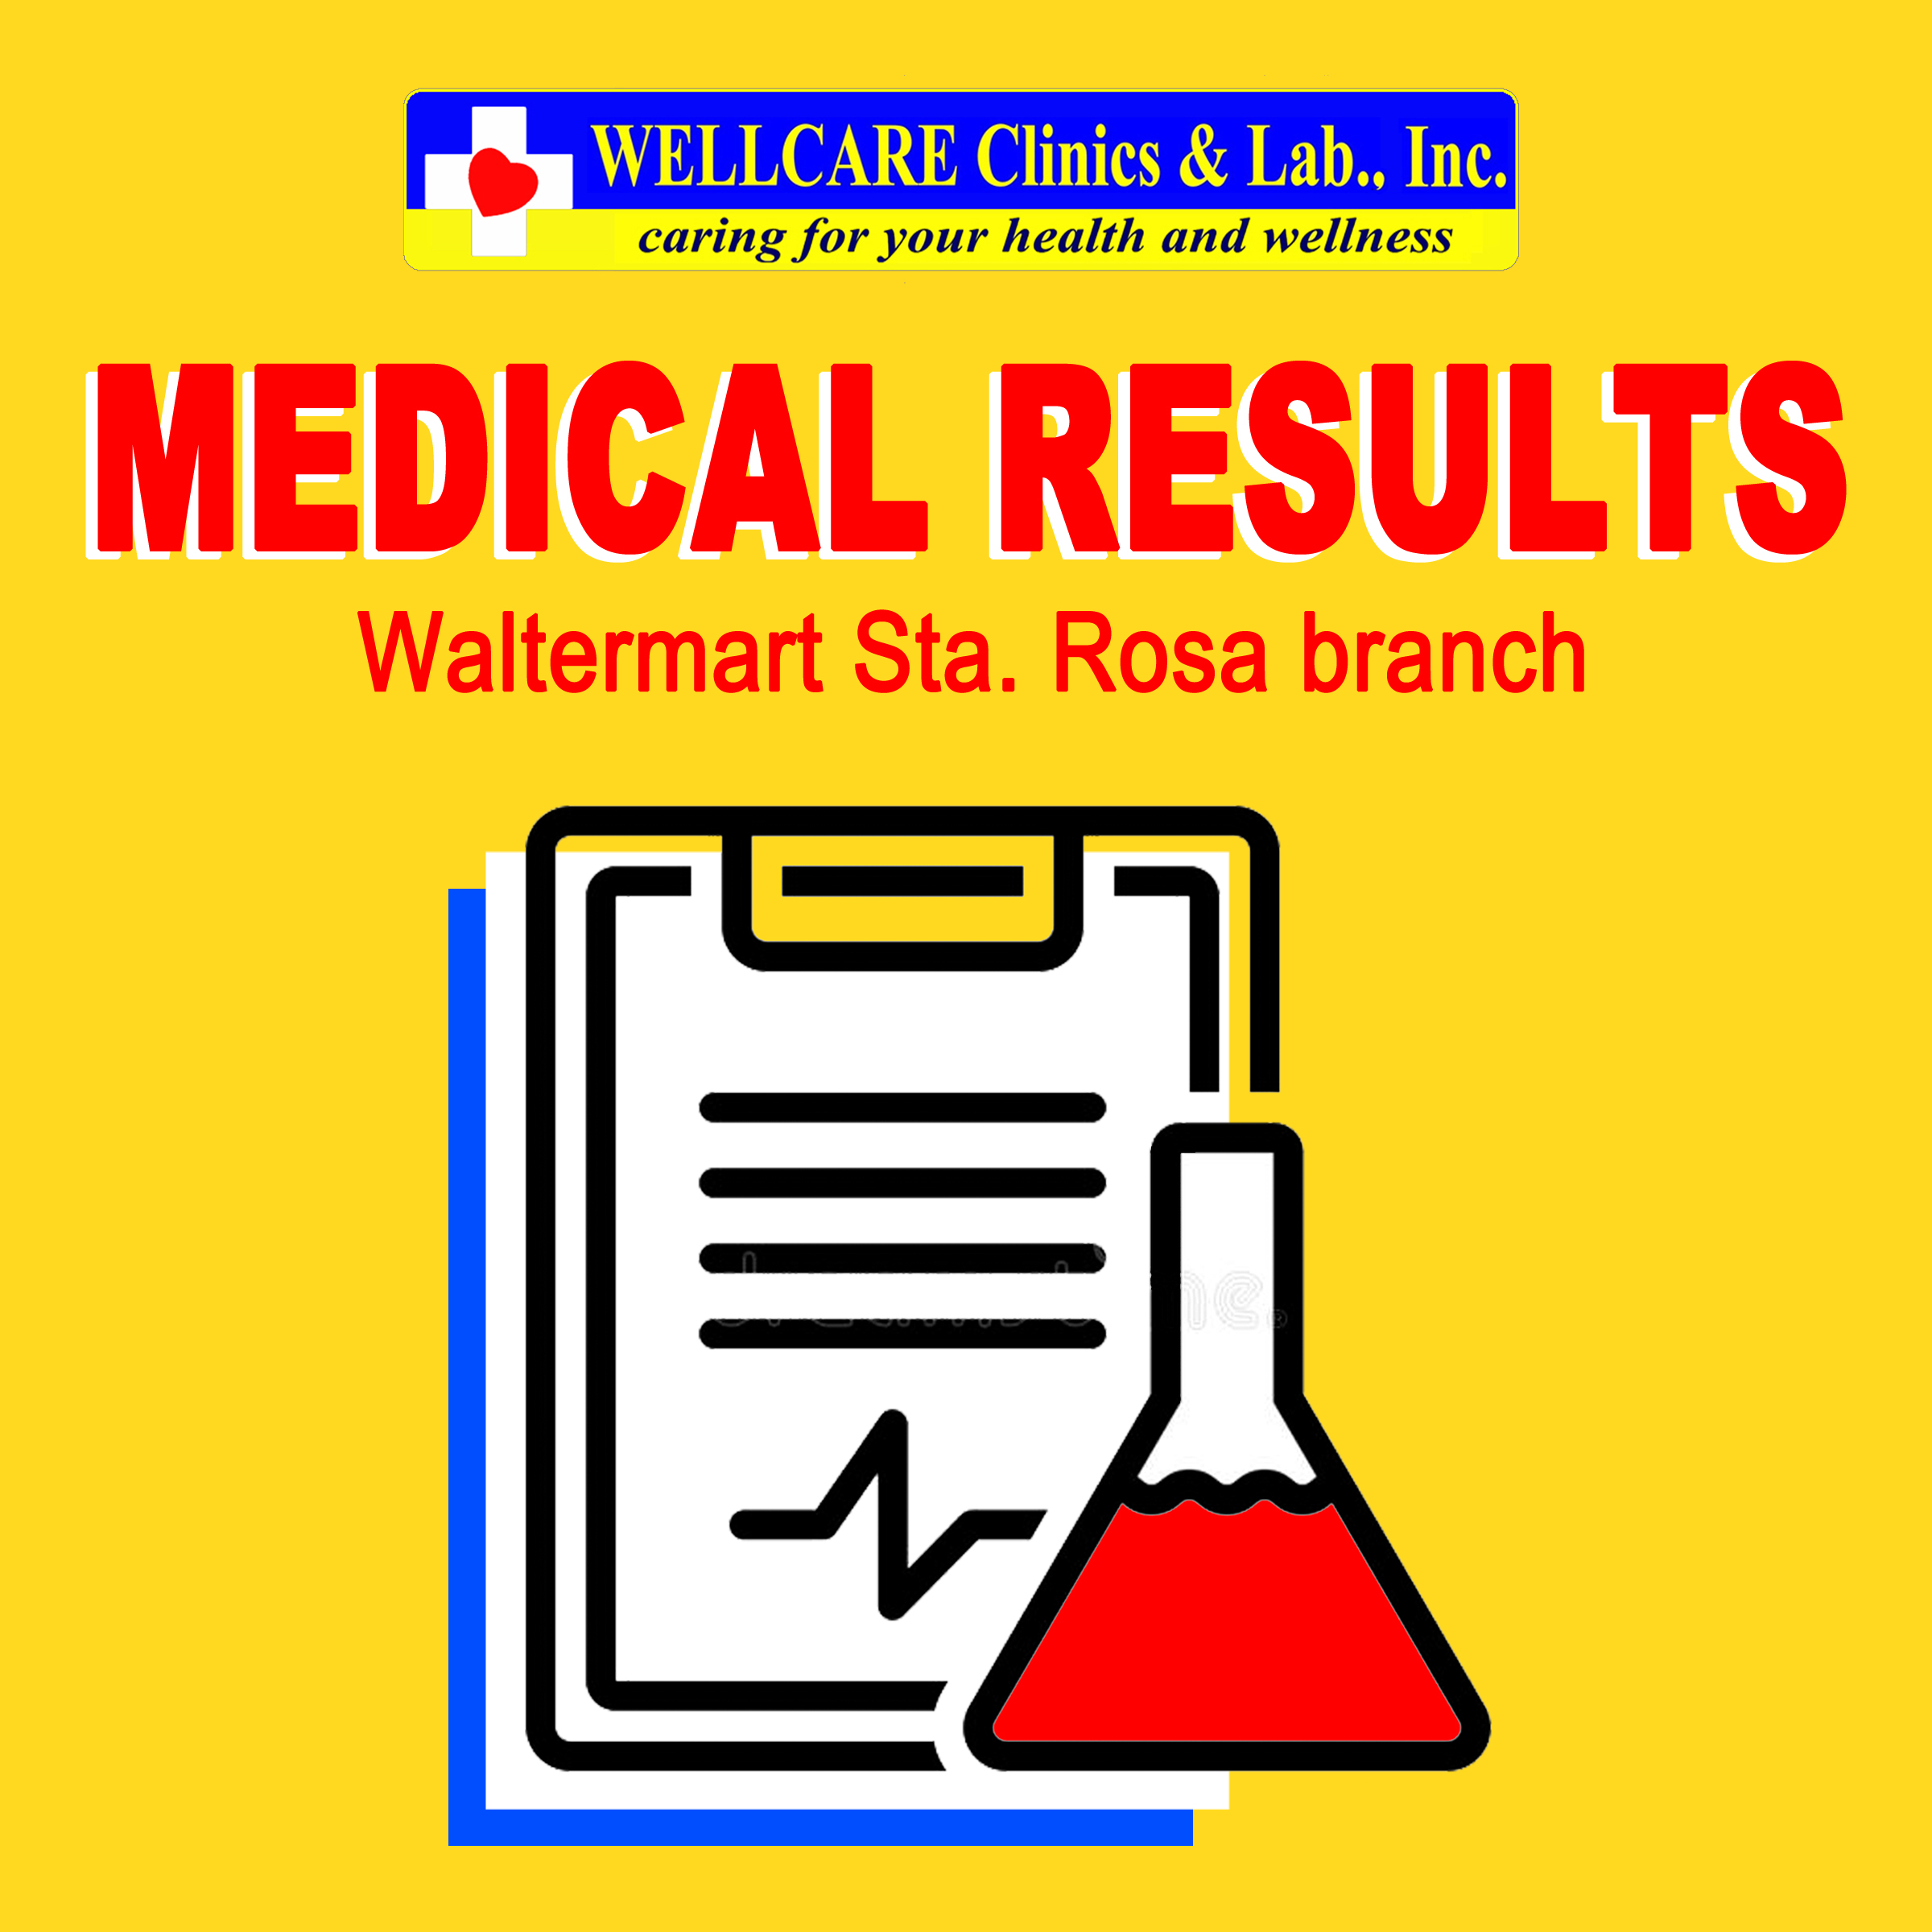 <3 To our beloved customers <3 To claim your Medical Results for Wellcare Clinics Waltermart Sta. Rosa Branch please contact us @ (049) 576-0010 / 0933.8204081 / 0925.5505792 / 0925.5167136 We care, Your Wellcare Family #IAmWellcare #stopcovid19 #Sta.Rosa